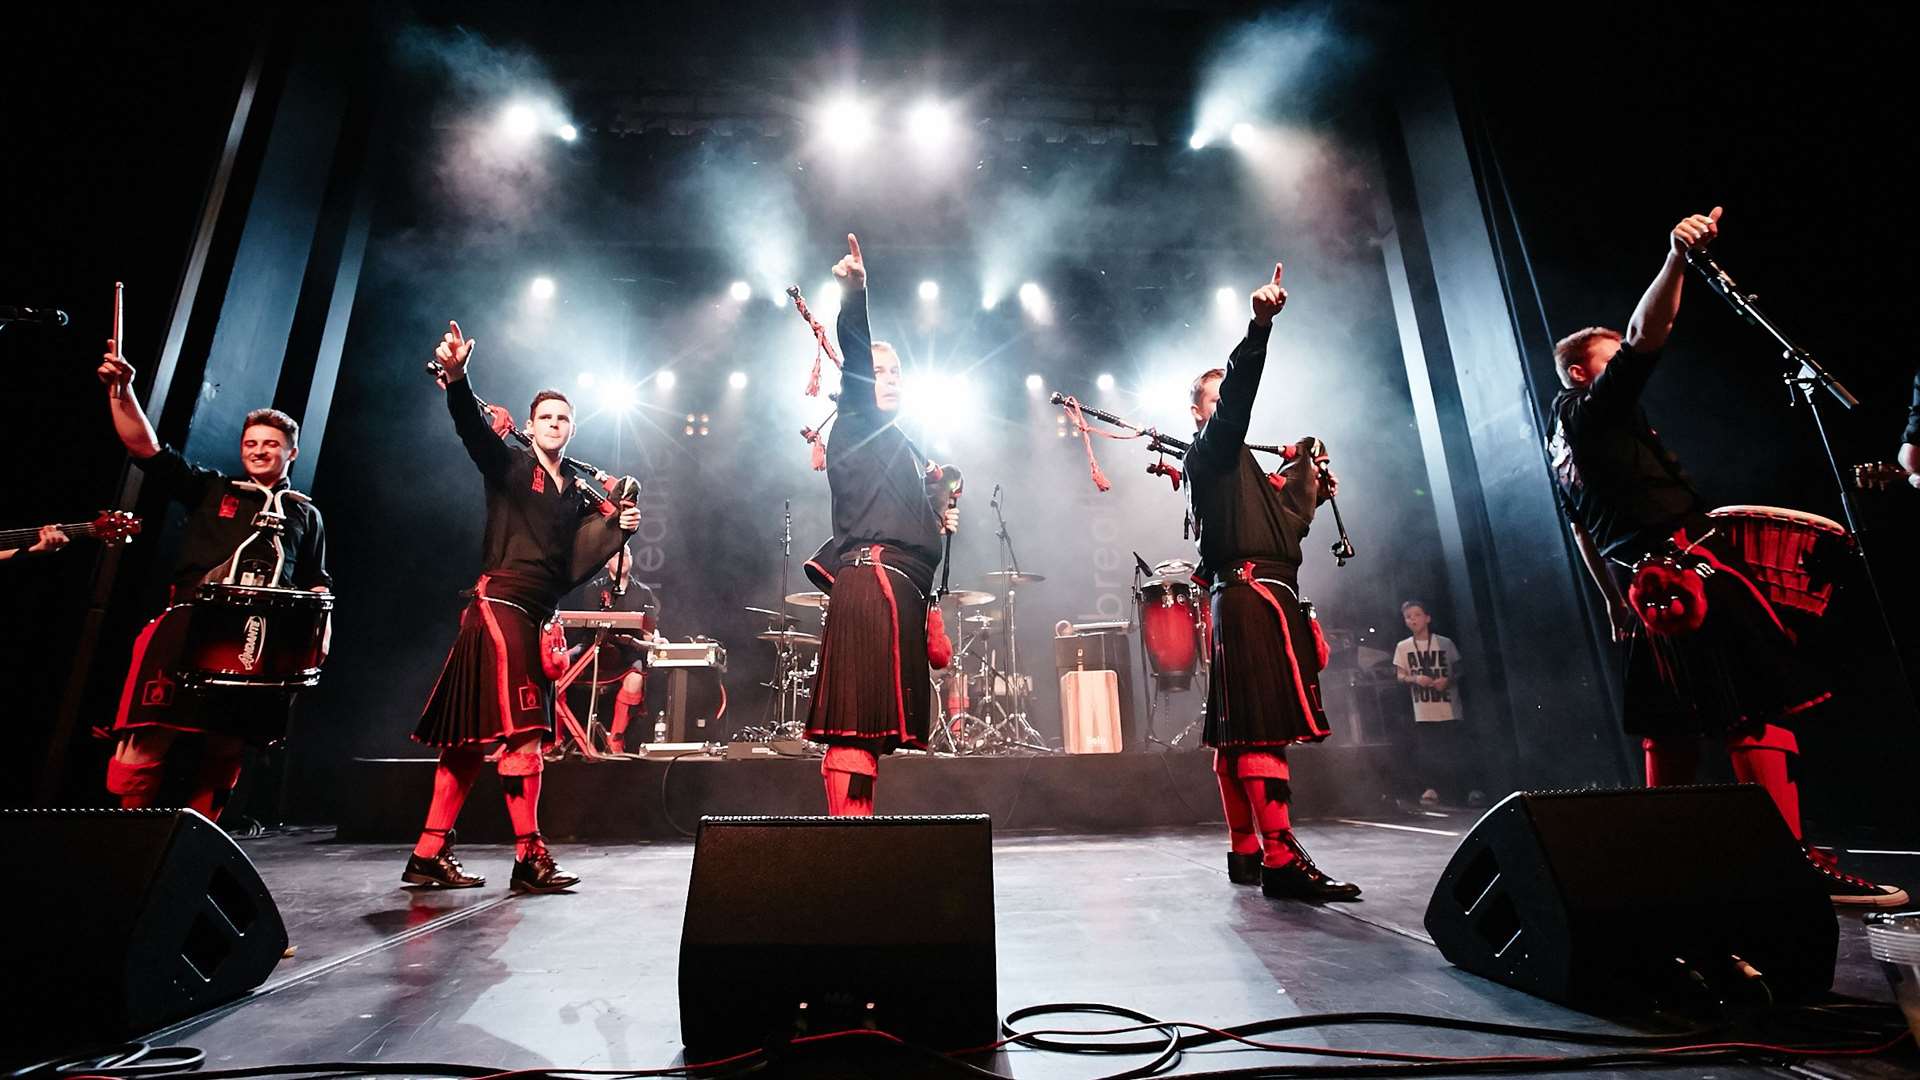 The Red Hot Chilli Pipers are an amazing live band.